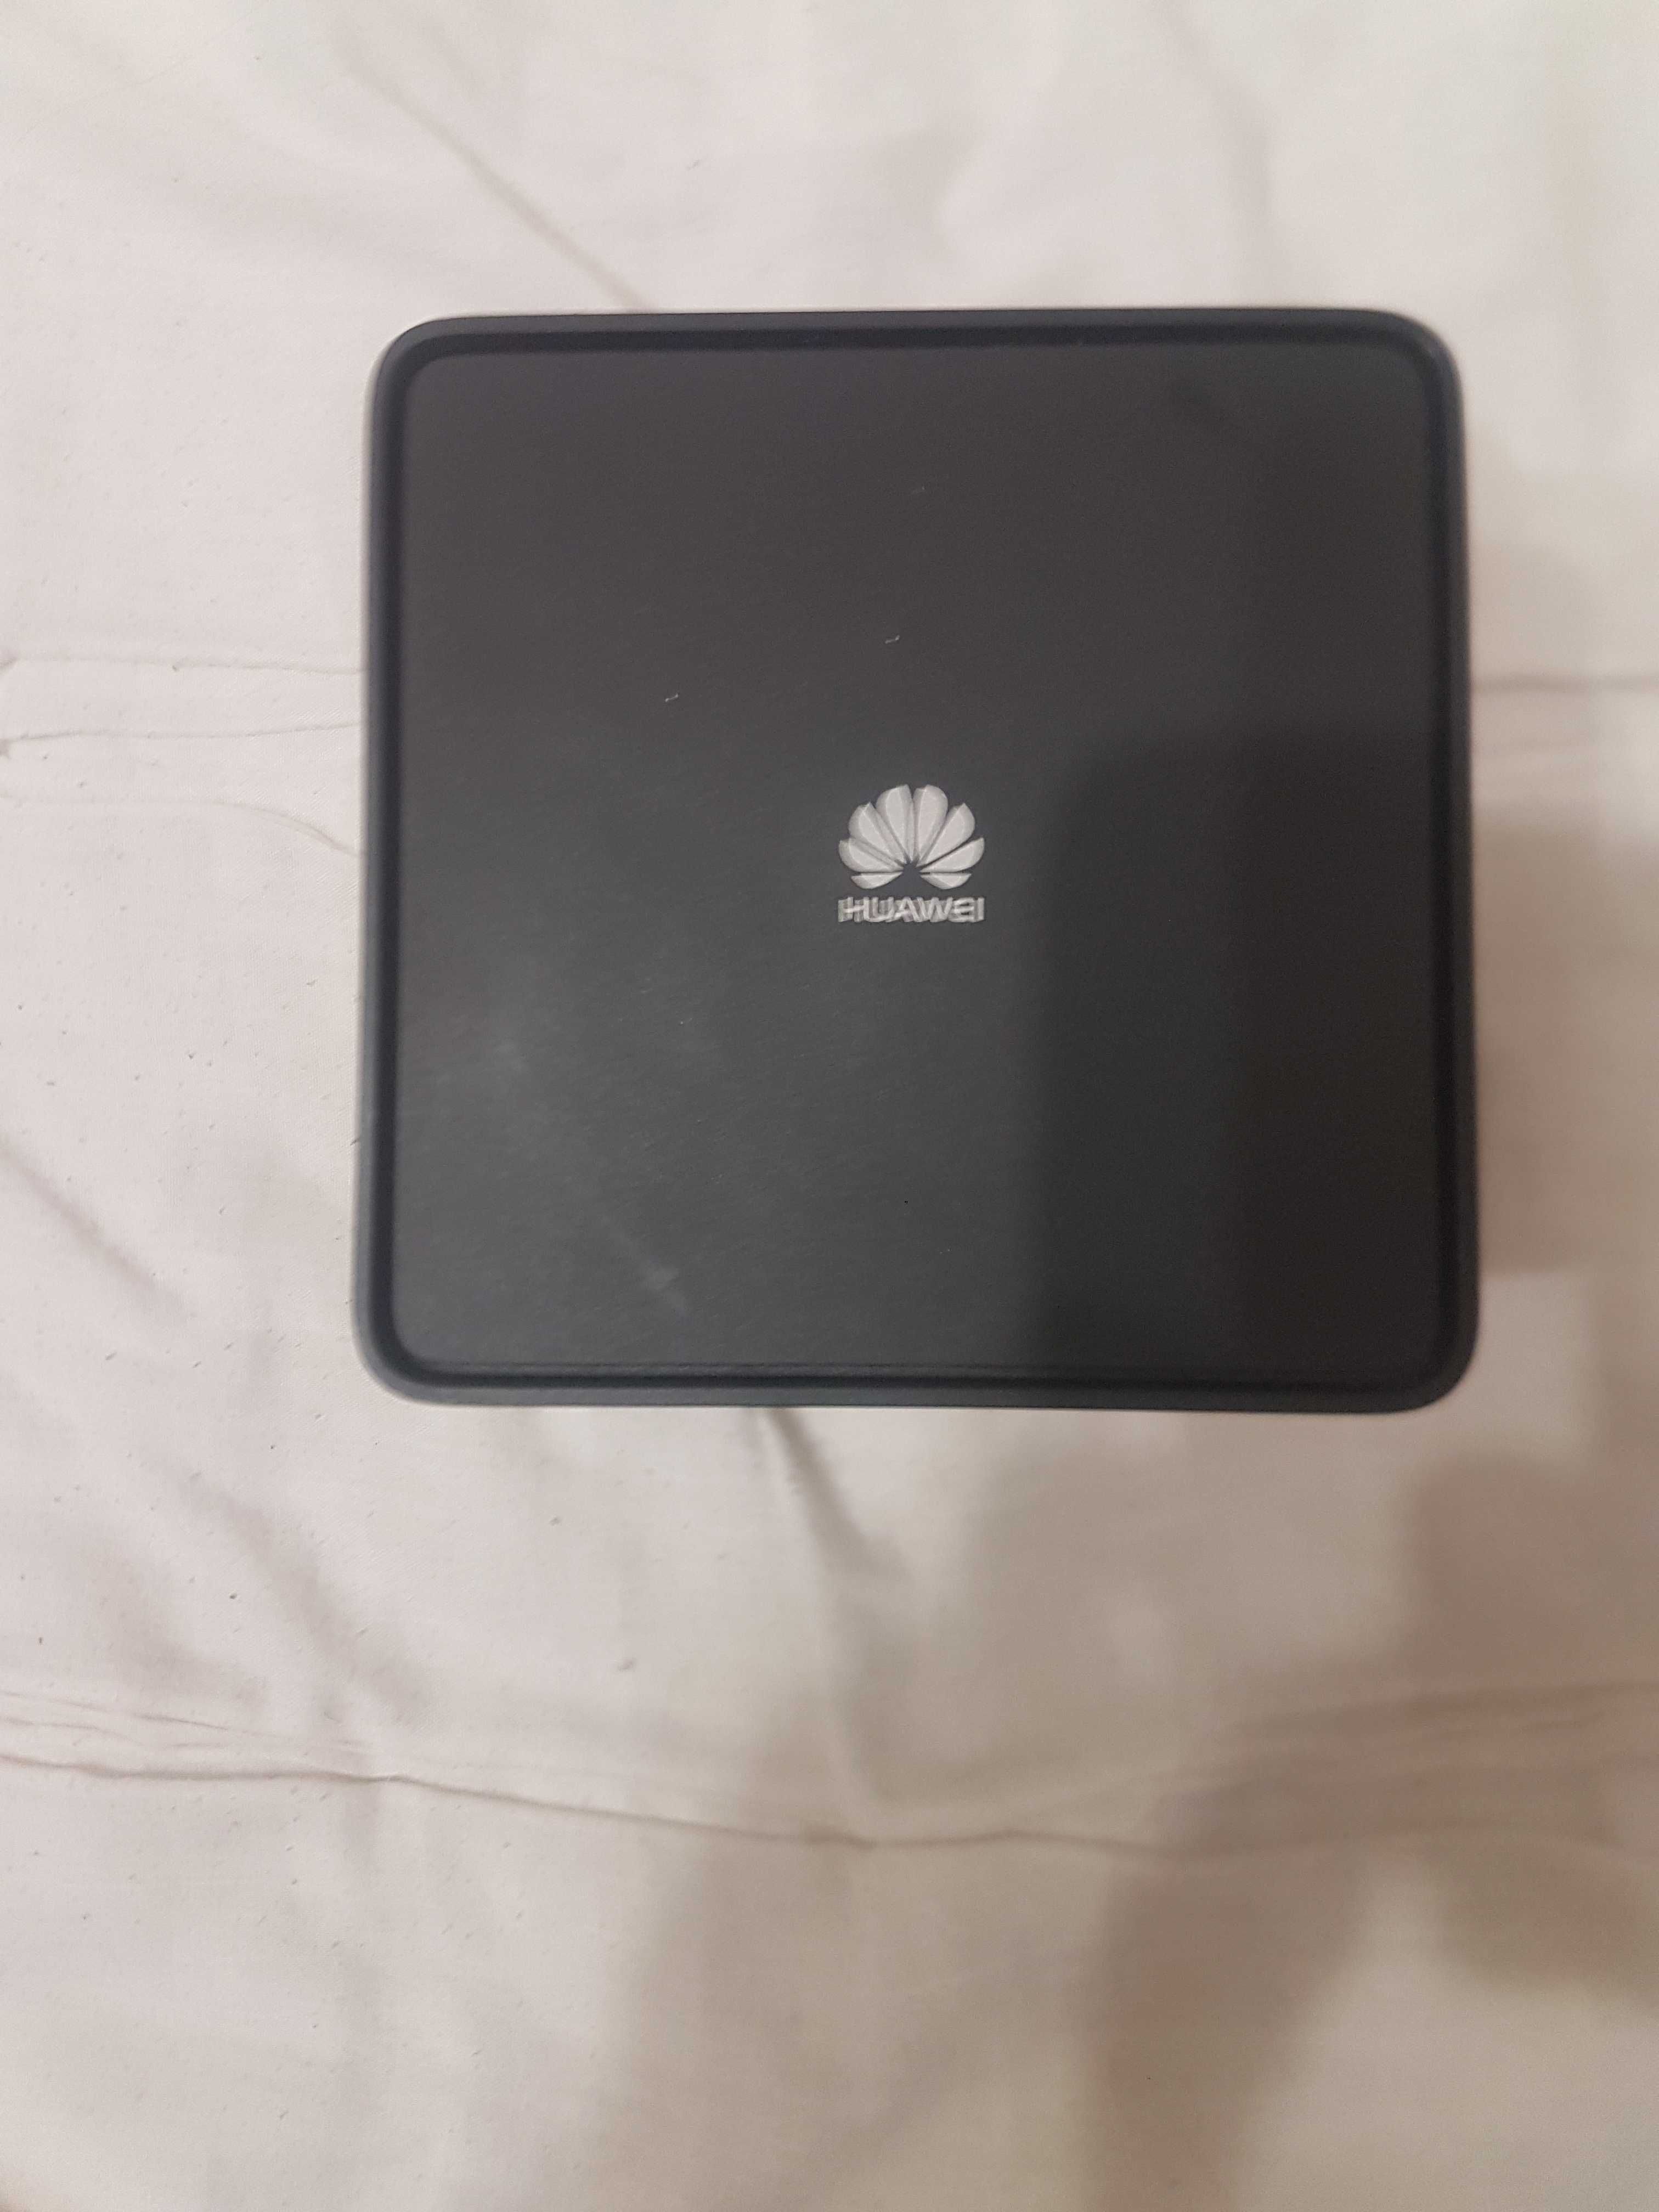 Router, modem 4g lte huawei